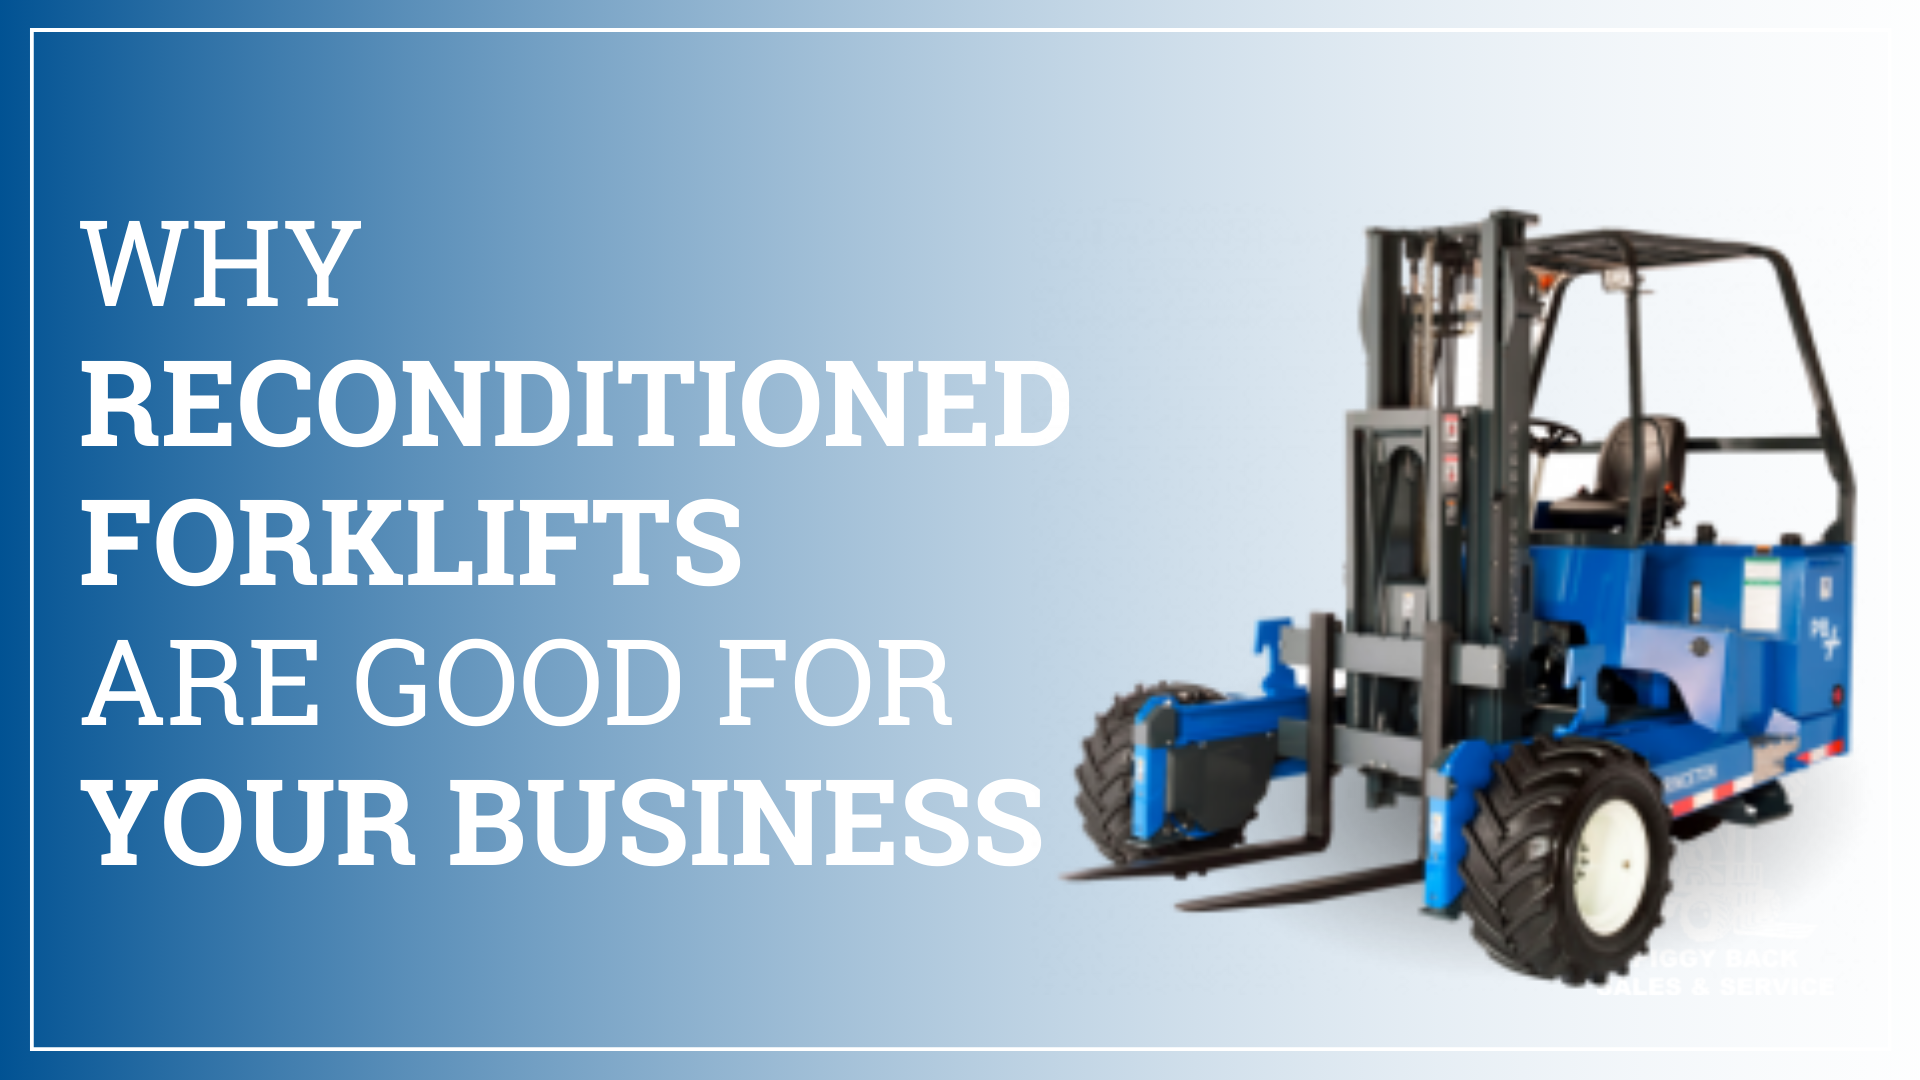 Why Reconditioned Forklifts Are Good for Your Business 